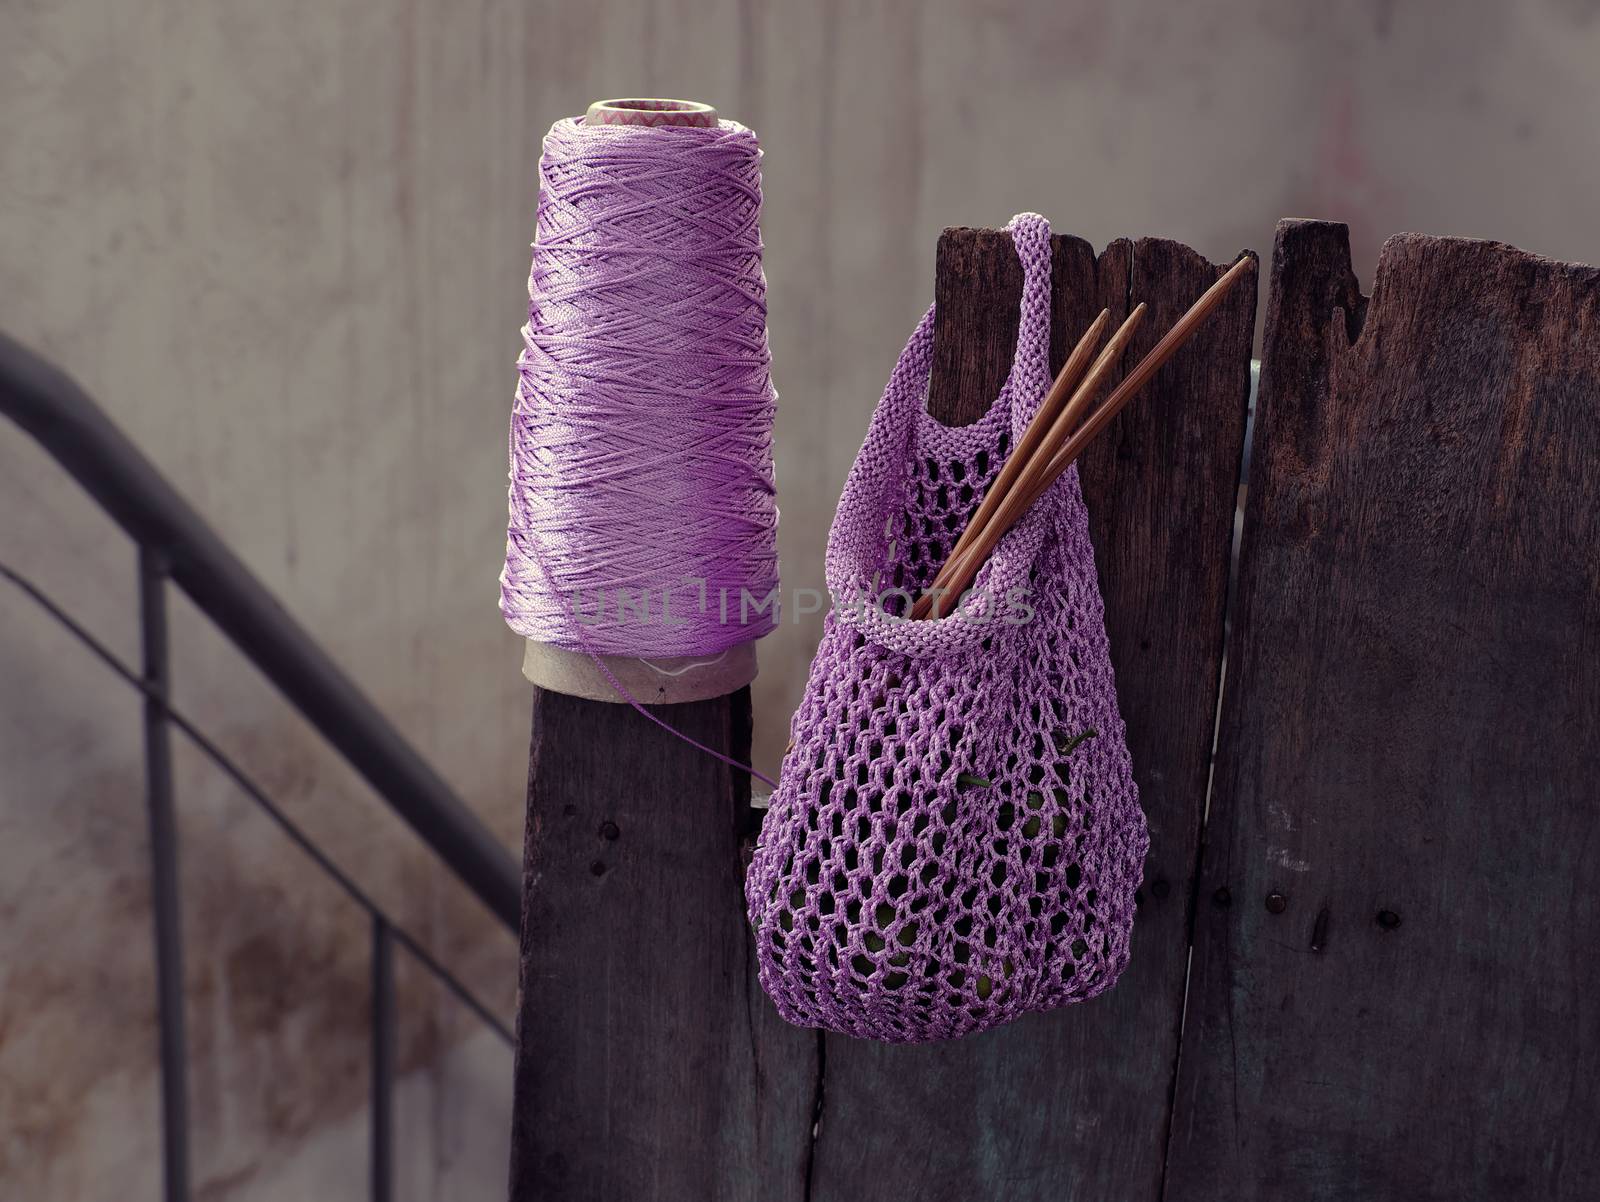 knit hand made hand bag from yarn by xuanhuongho